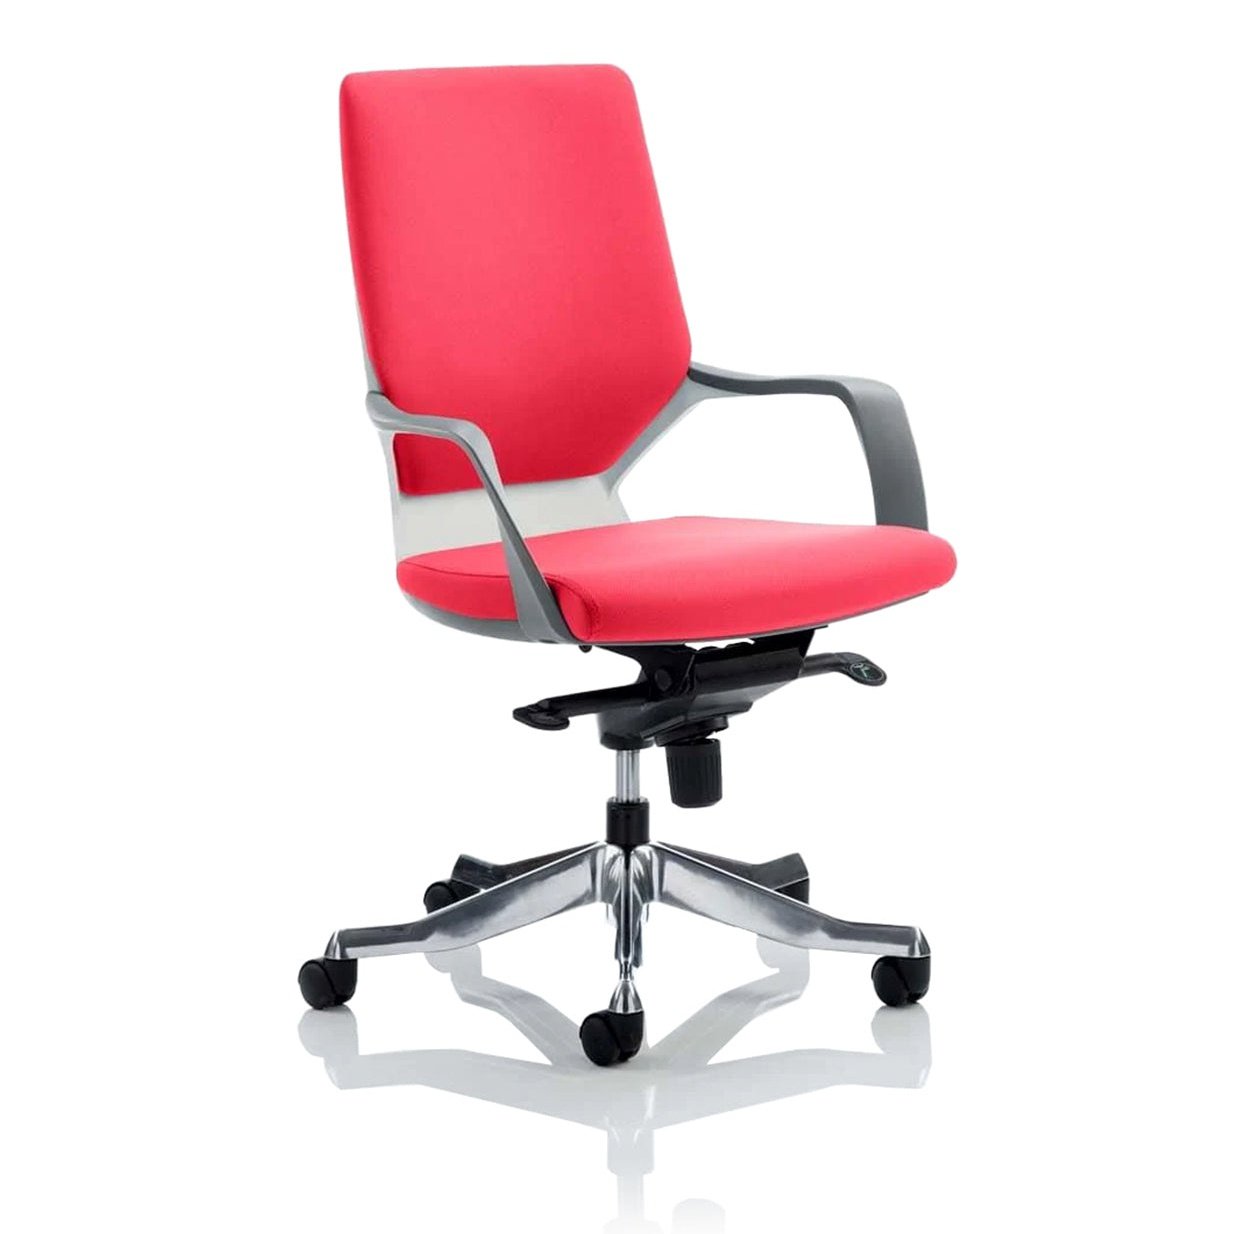 Xenon Medium Back Executive Office Chair - Fabric Seat, Aluminium Frame, Fixed Arms, 125kg Capacity, 8hr Usage, 5yr Warranty - Flat Packed